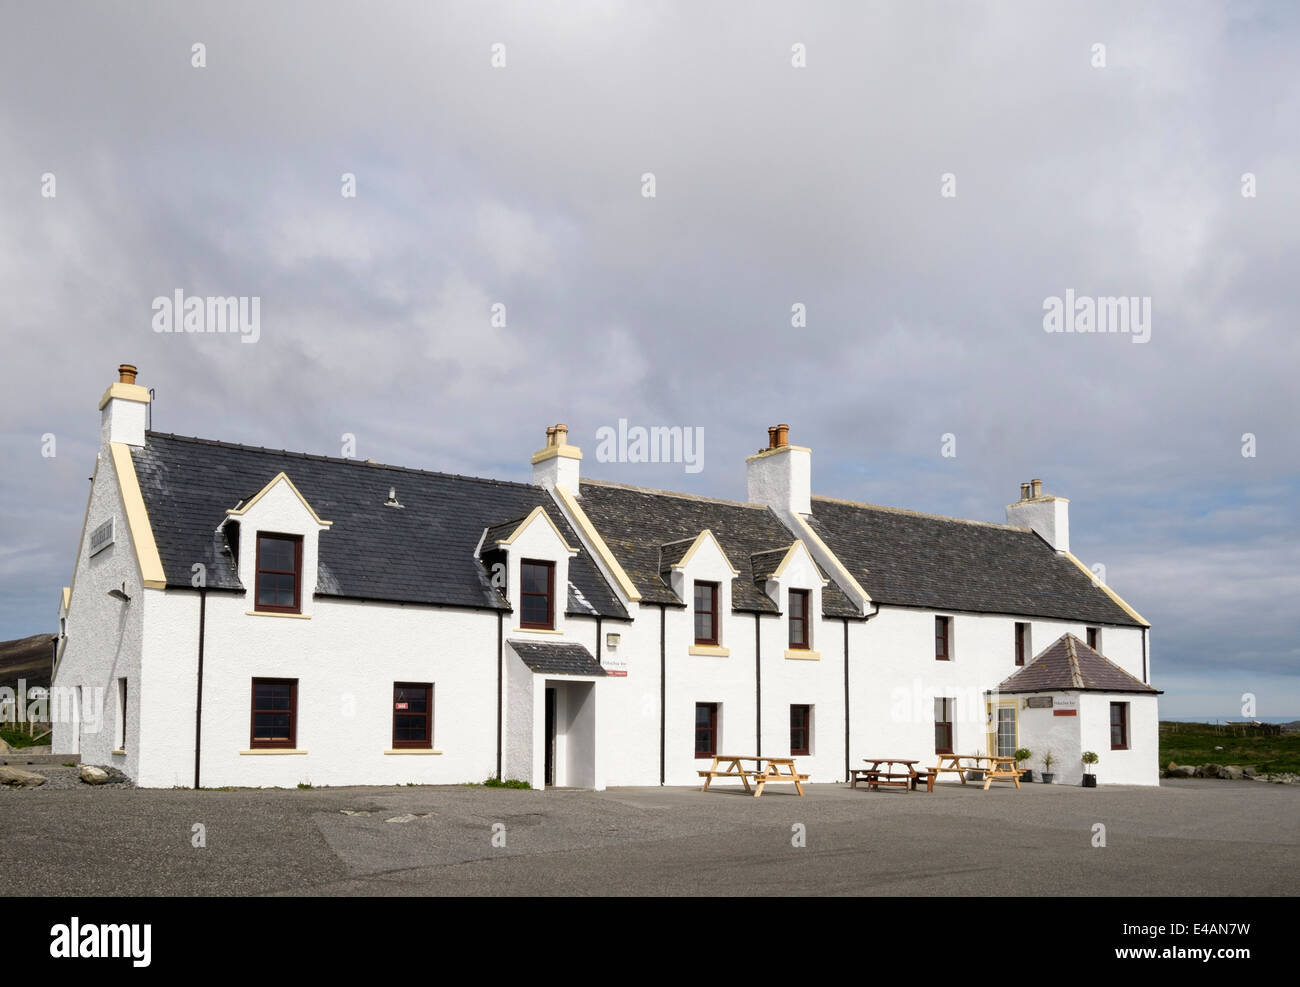 Polochar Inn pub and hotel front. Pol a Chara, South Uist, Outer Hebrides, Western Isles, Scotland, UK, Britain Stock Photo